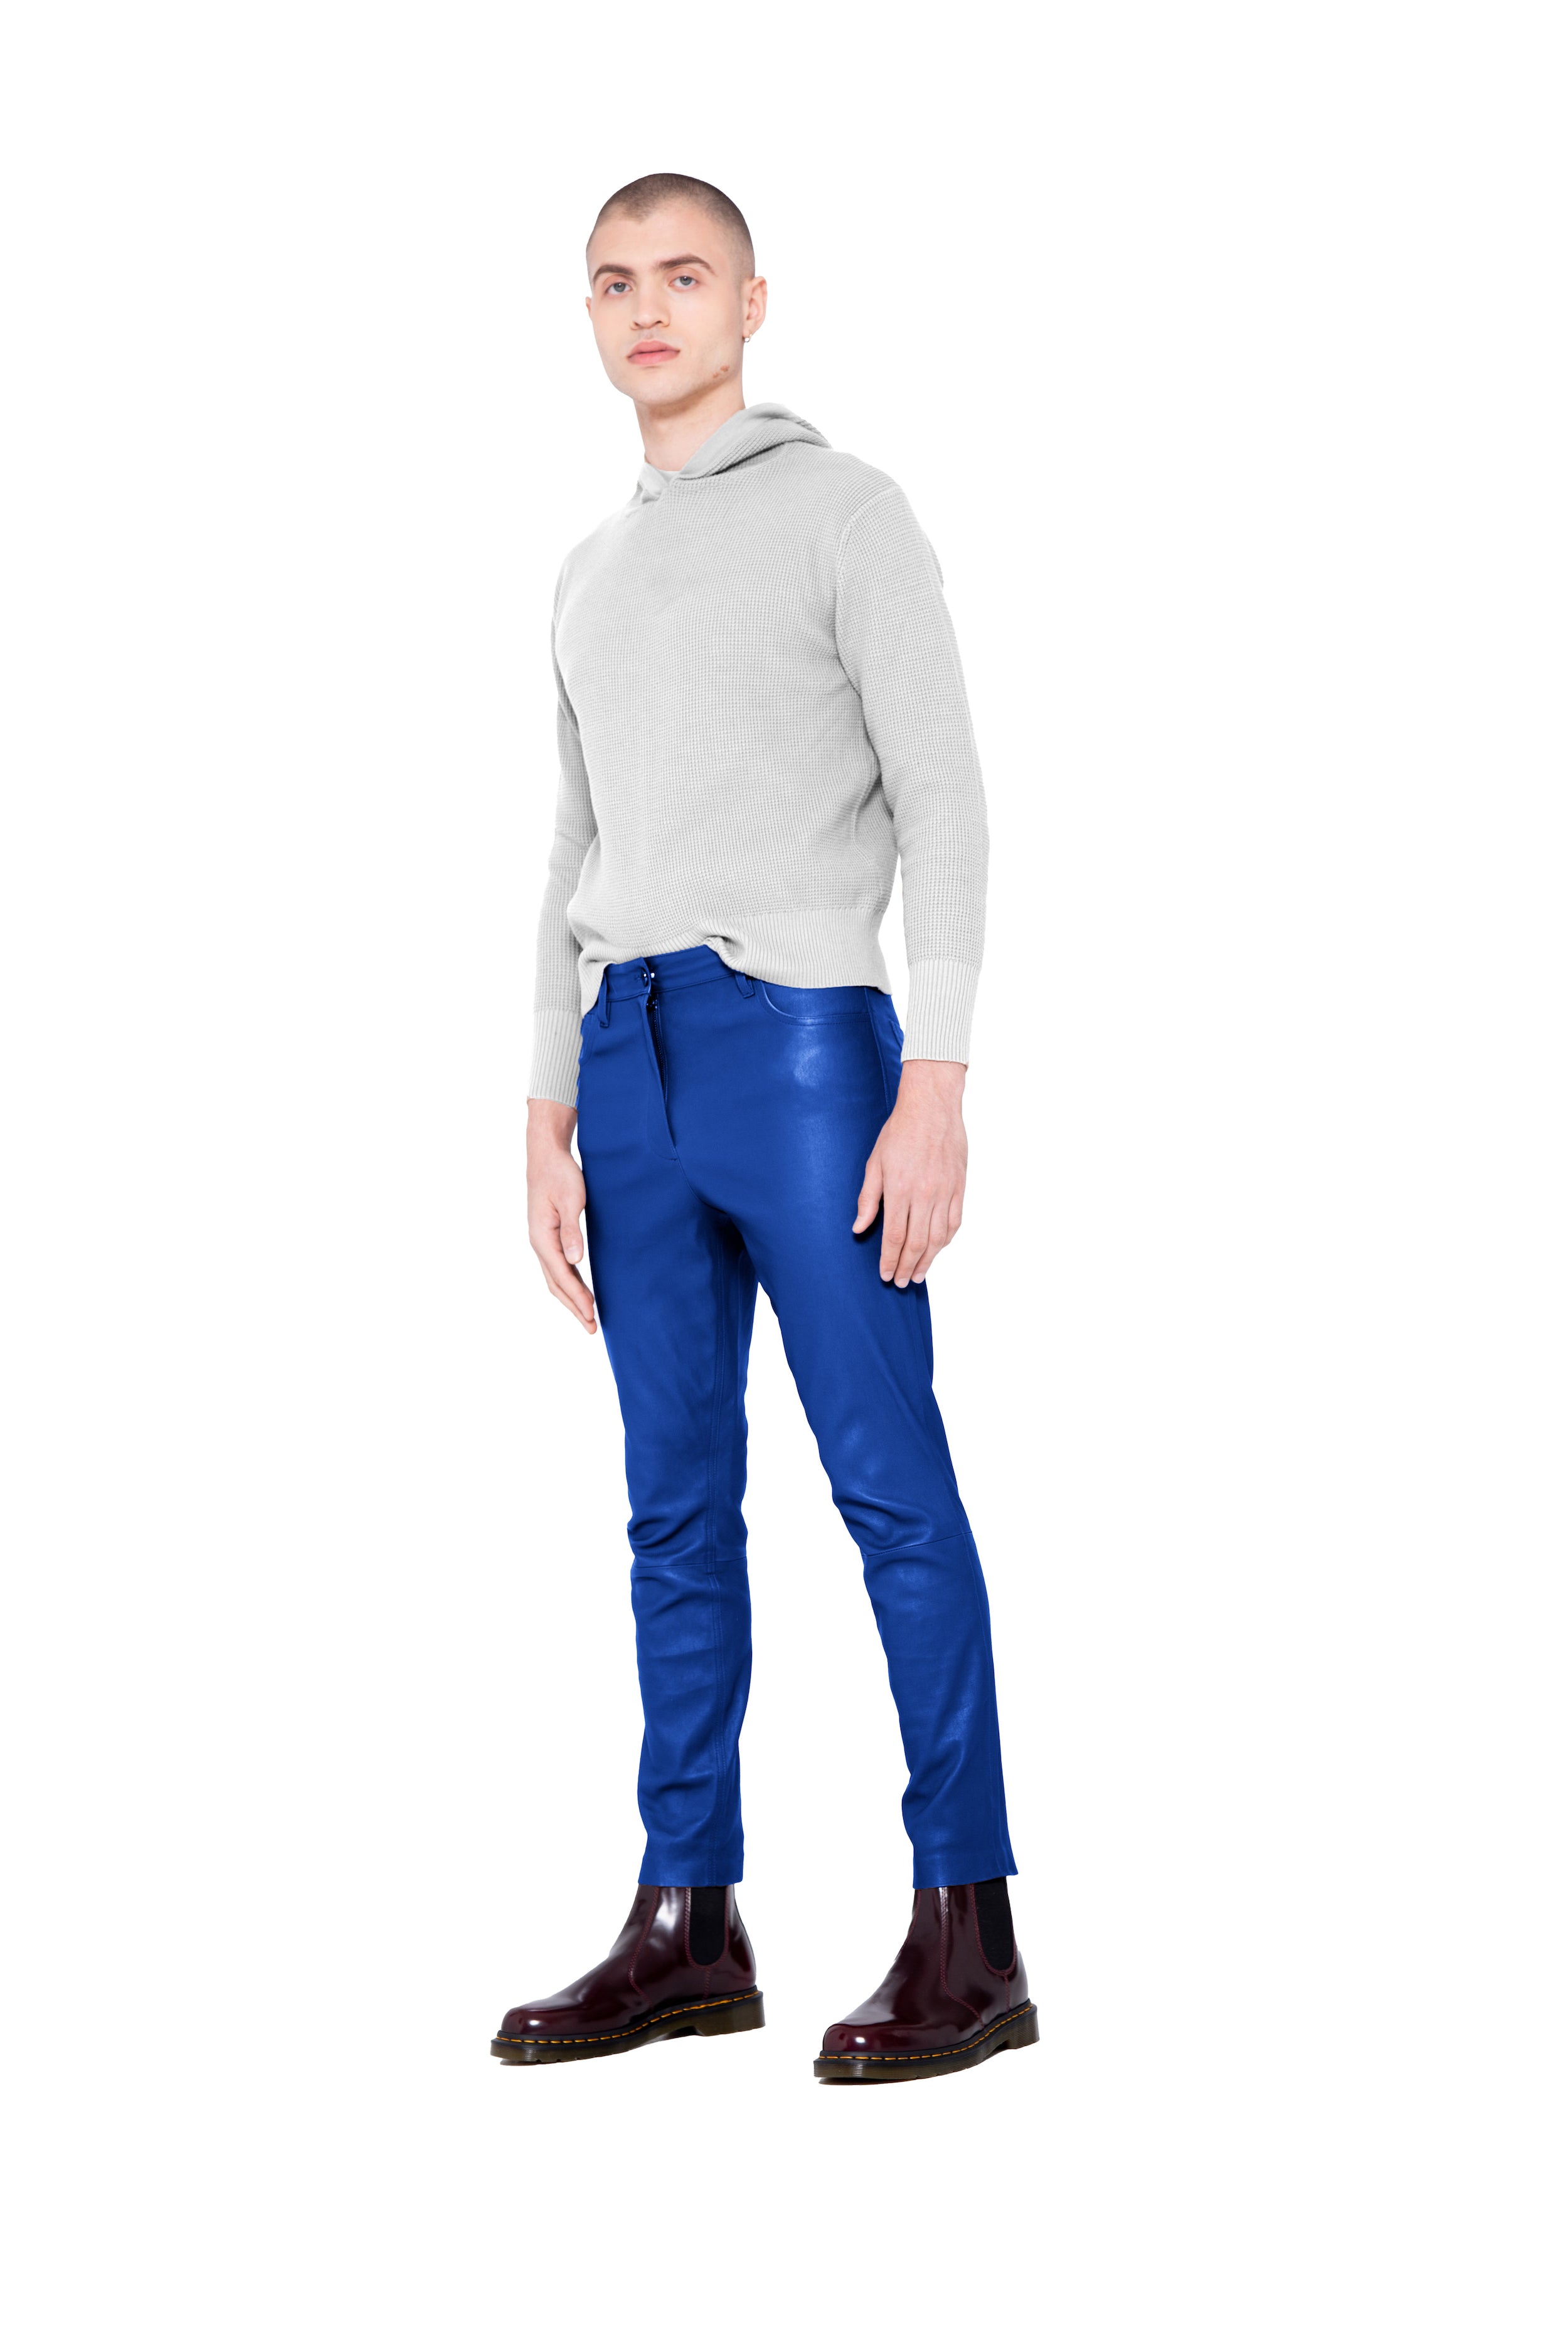 Plastering metallic midnight blue jean | Mens leather pants, Mens outfits,  Well dressed men